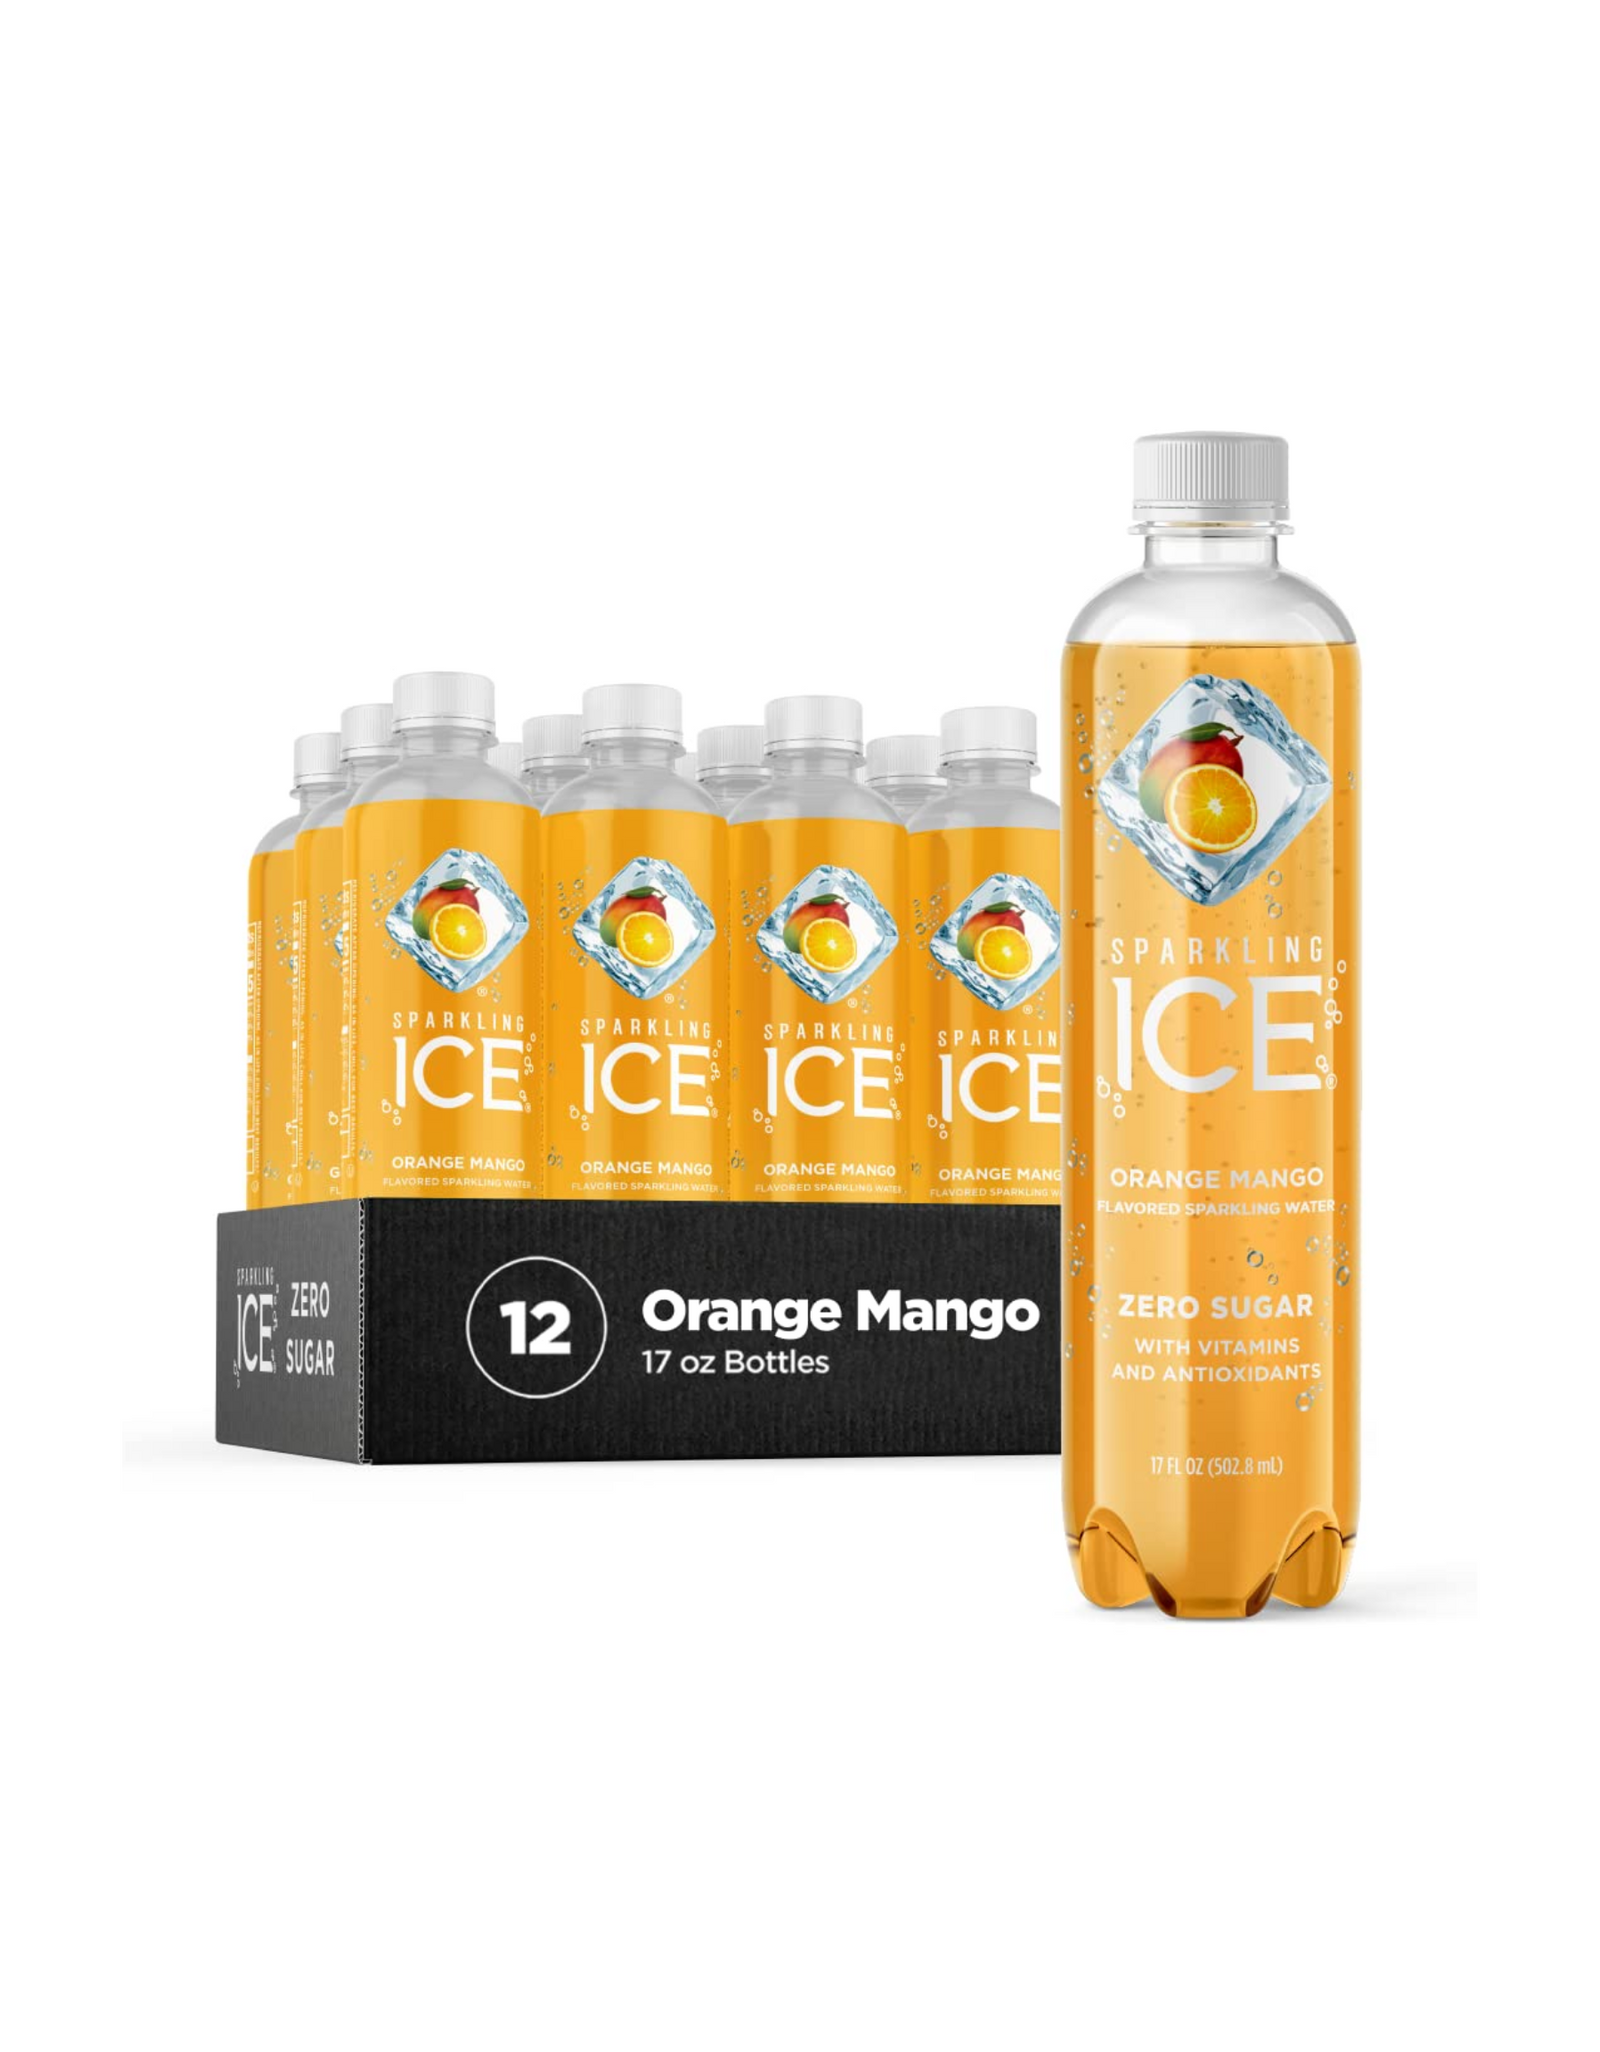 Sparkling Ice, Orange Mango Sparkling Water, with Vitamins and Antioxidants, 17 fl oz (Pack of 12)